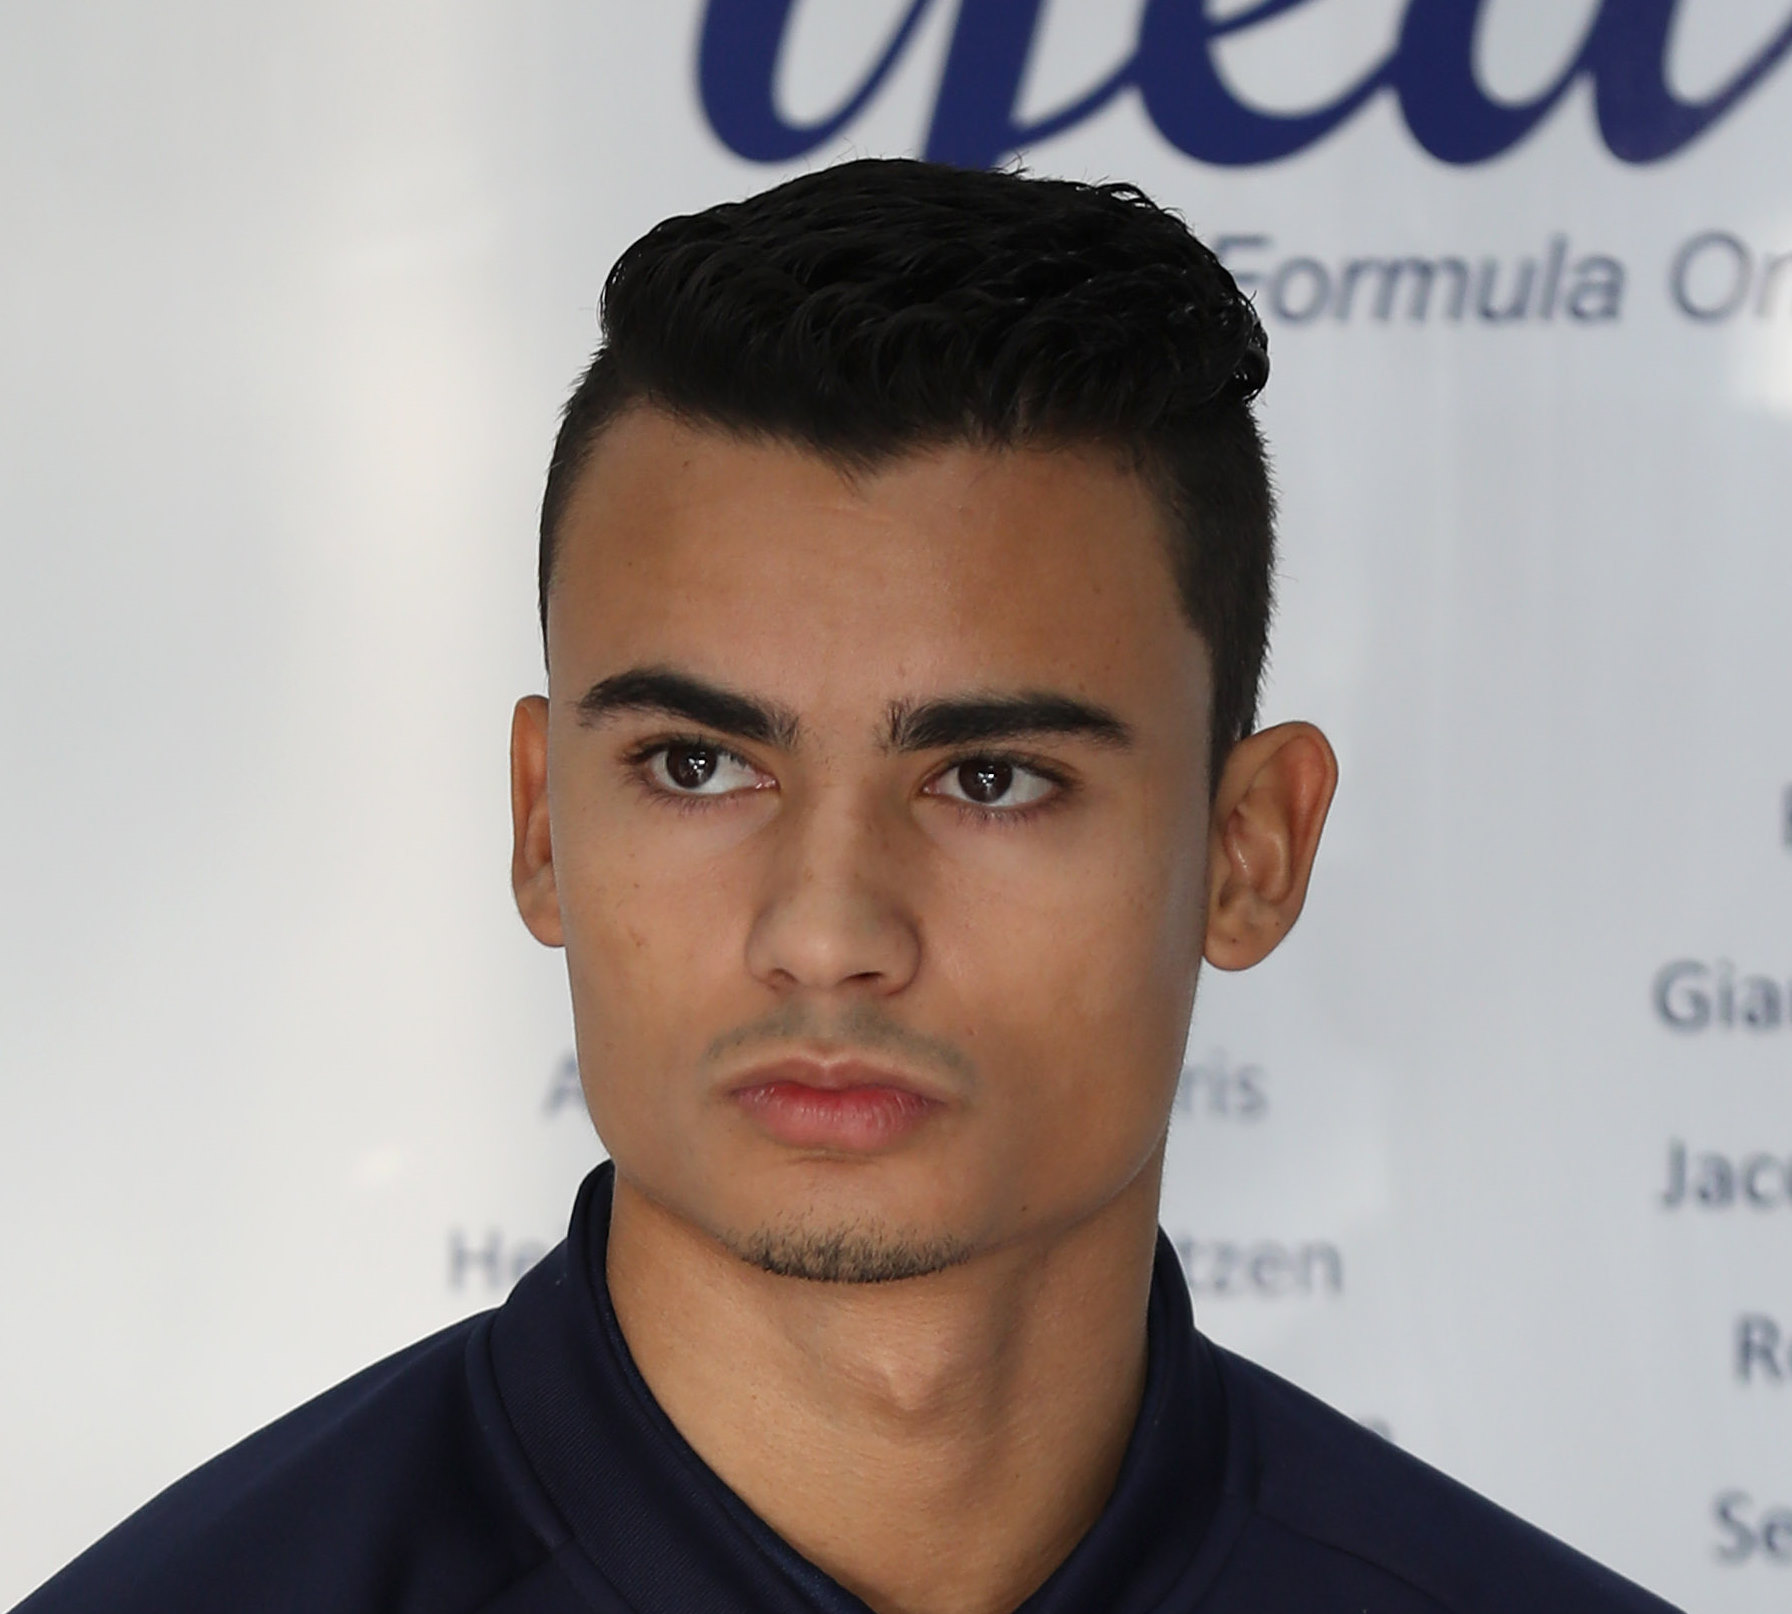 Pascal Wehrlein was slower than even his teammate Ericsson on Friday